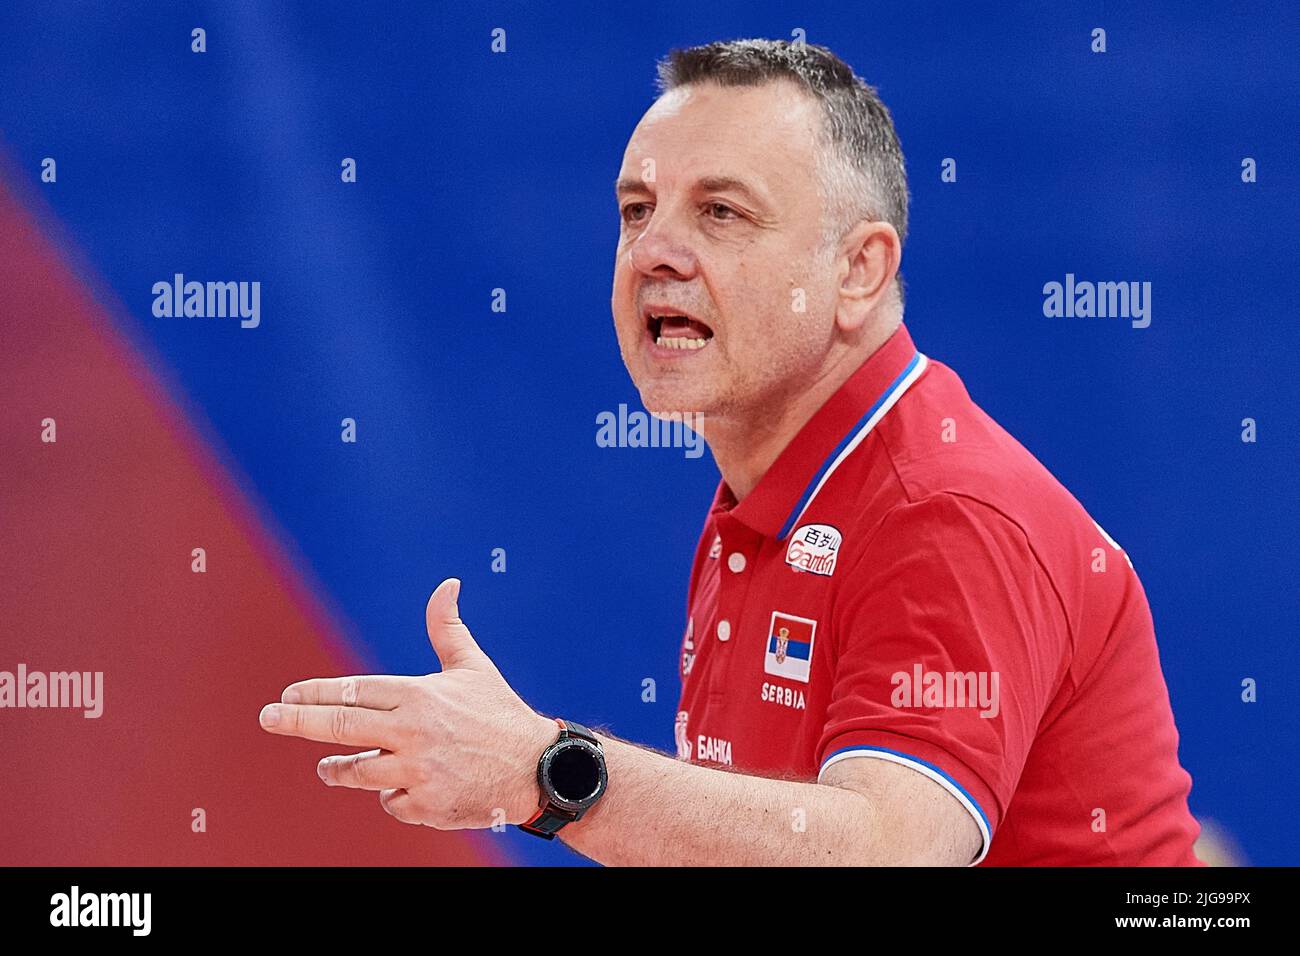 Gdansk, Poland. 08th July, 2022. Coach of the Serbia national team Igor Kolakovic in action during the 2022 men's FIVB Volleyball Nations League match between Italy and Serbia in Gdansk, Poland, 08 July 2022. Credit: PAP/Alamy Live News Stock Photo